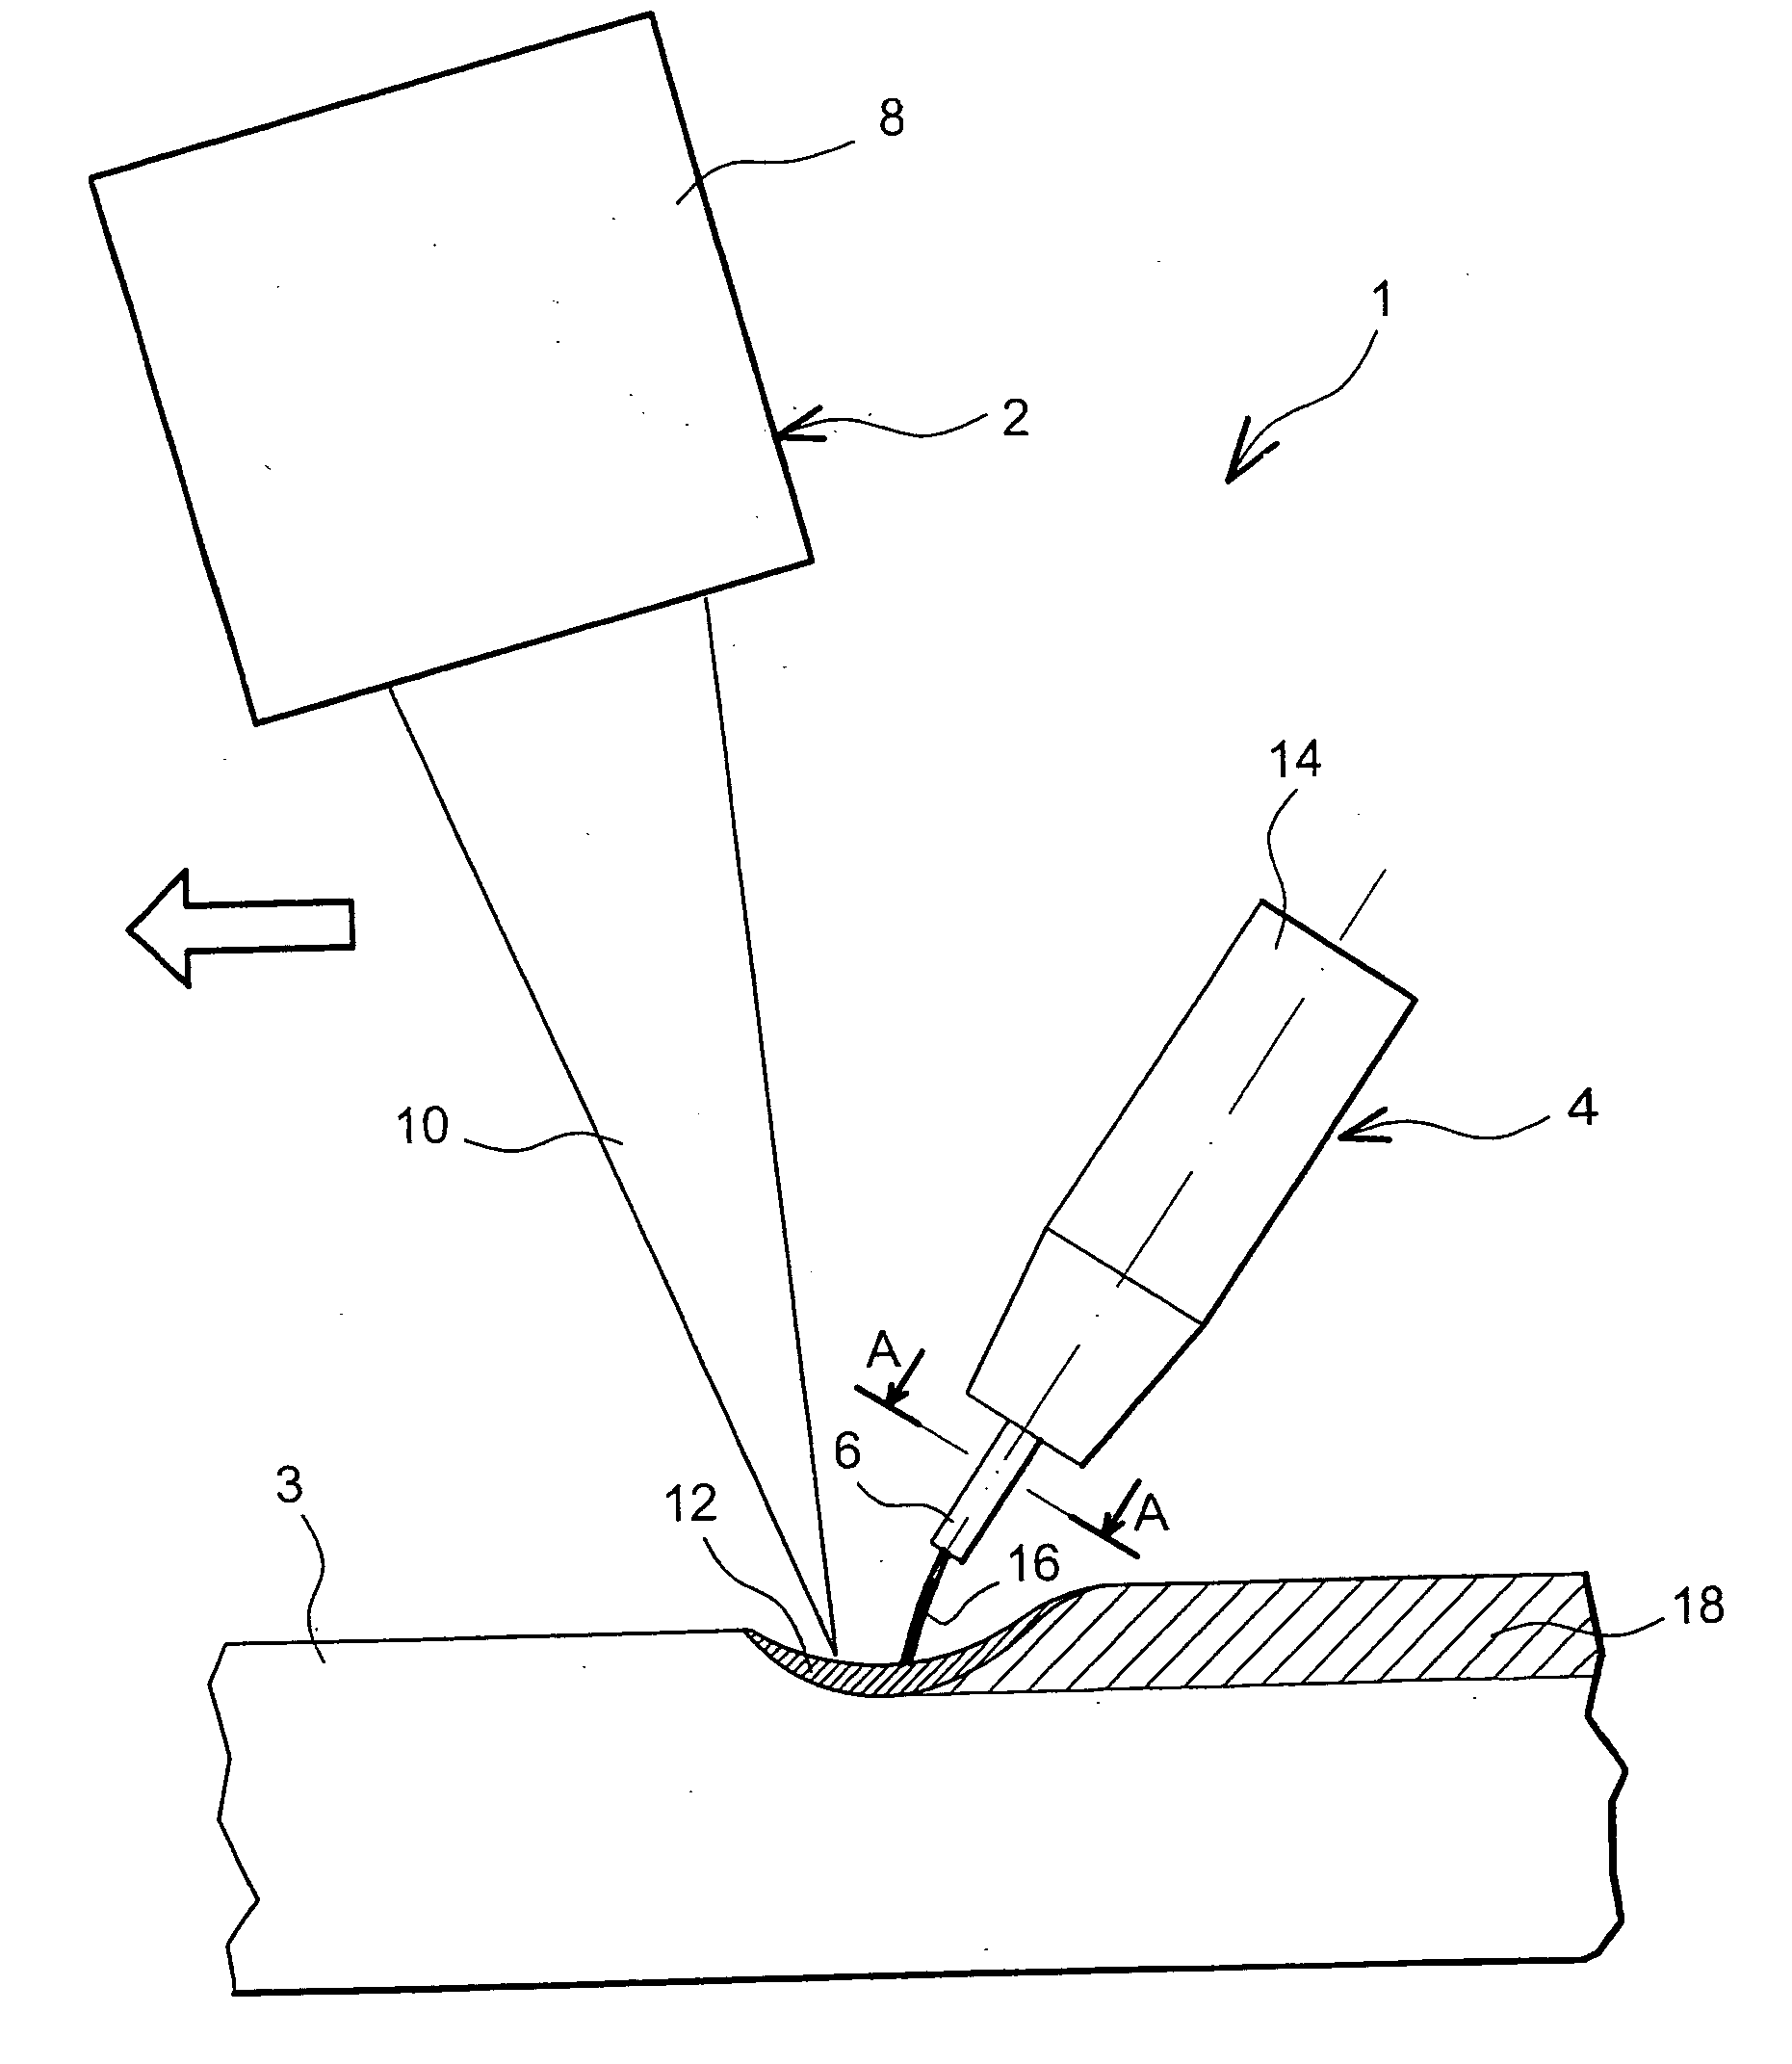 Device and method for hybrid welding